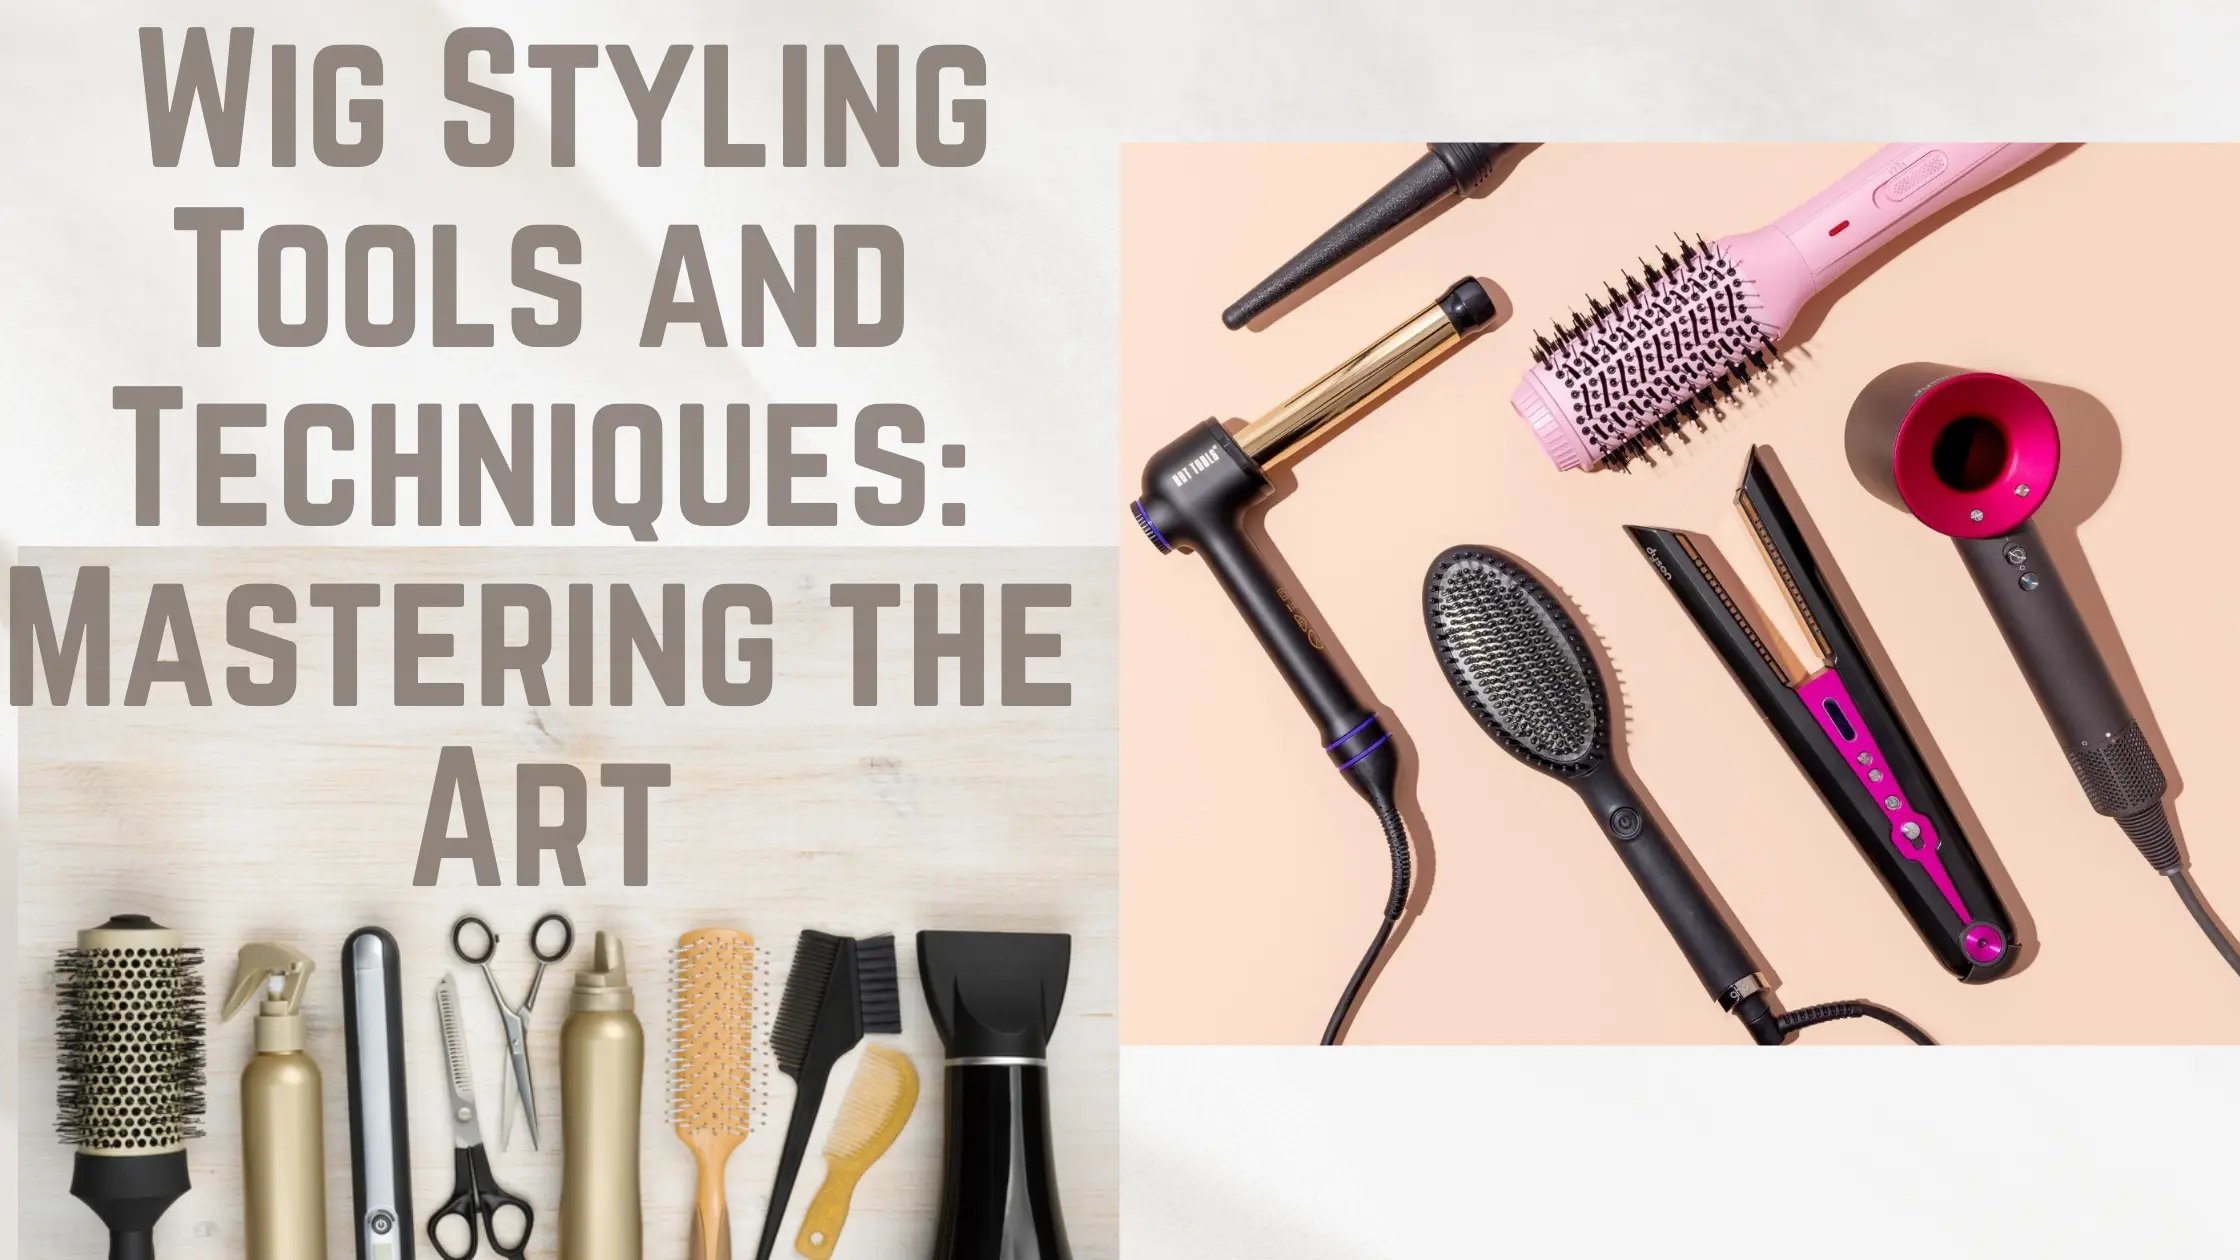 Wig Styling Tools and Techniques: Mastering the Art